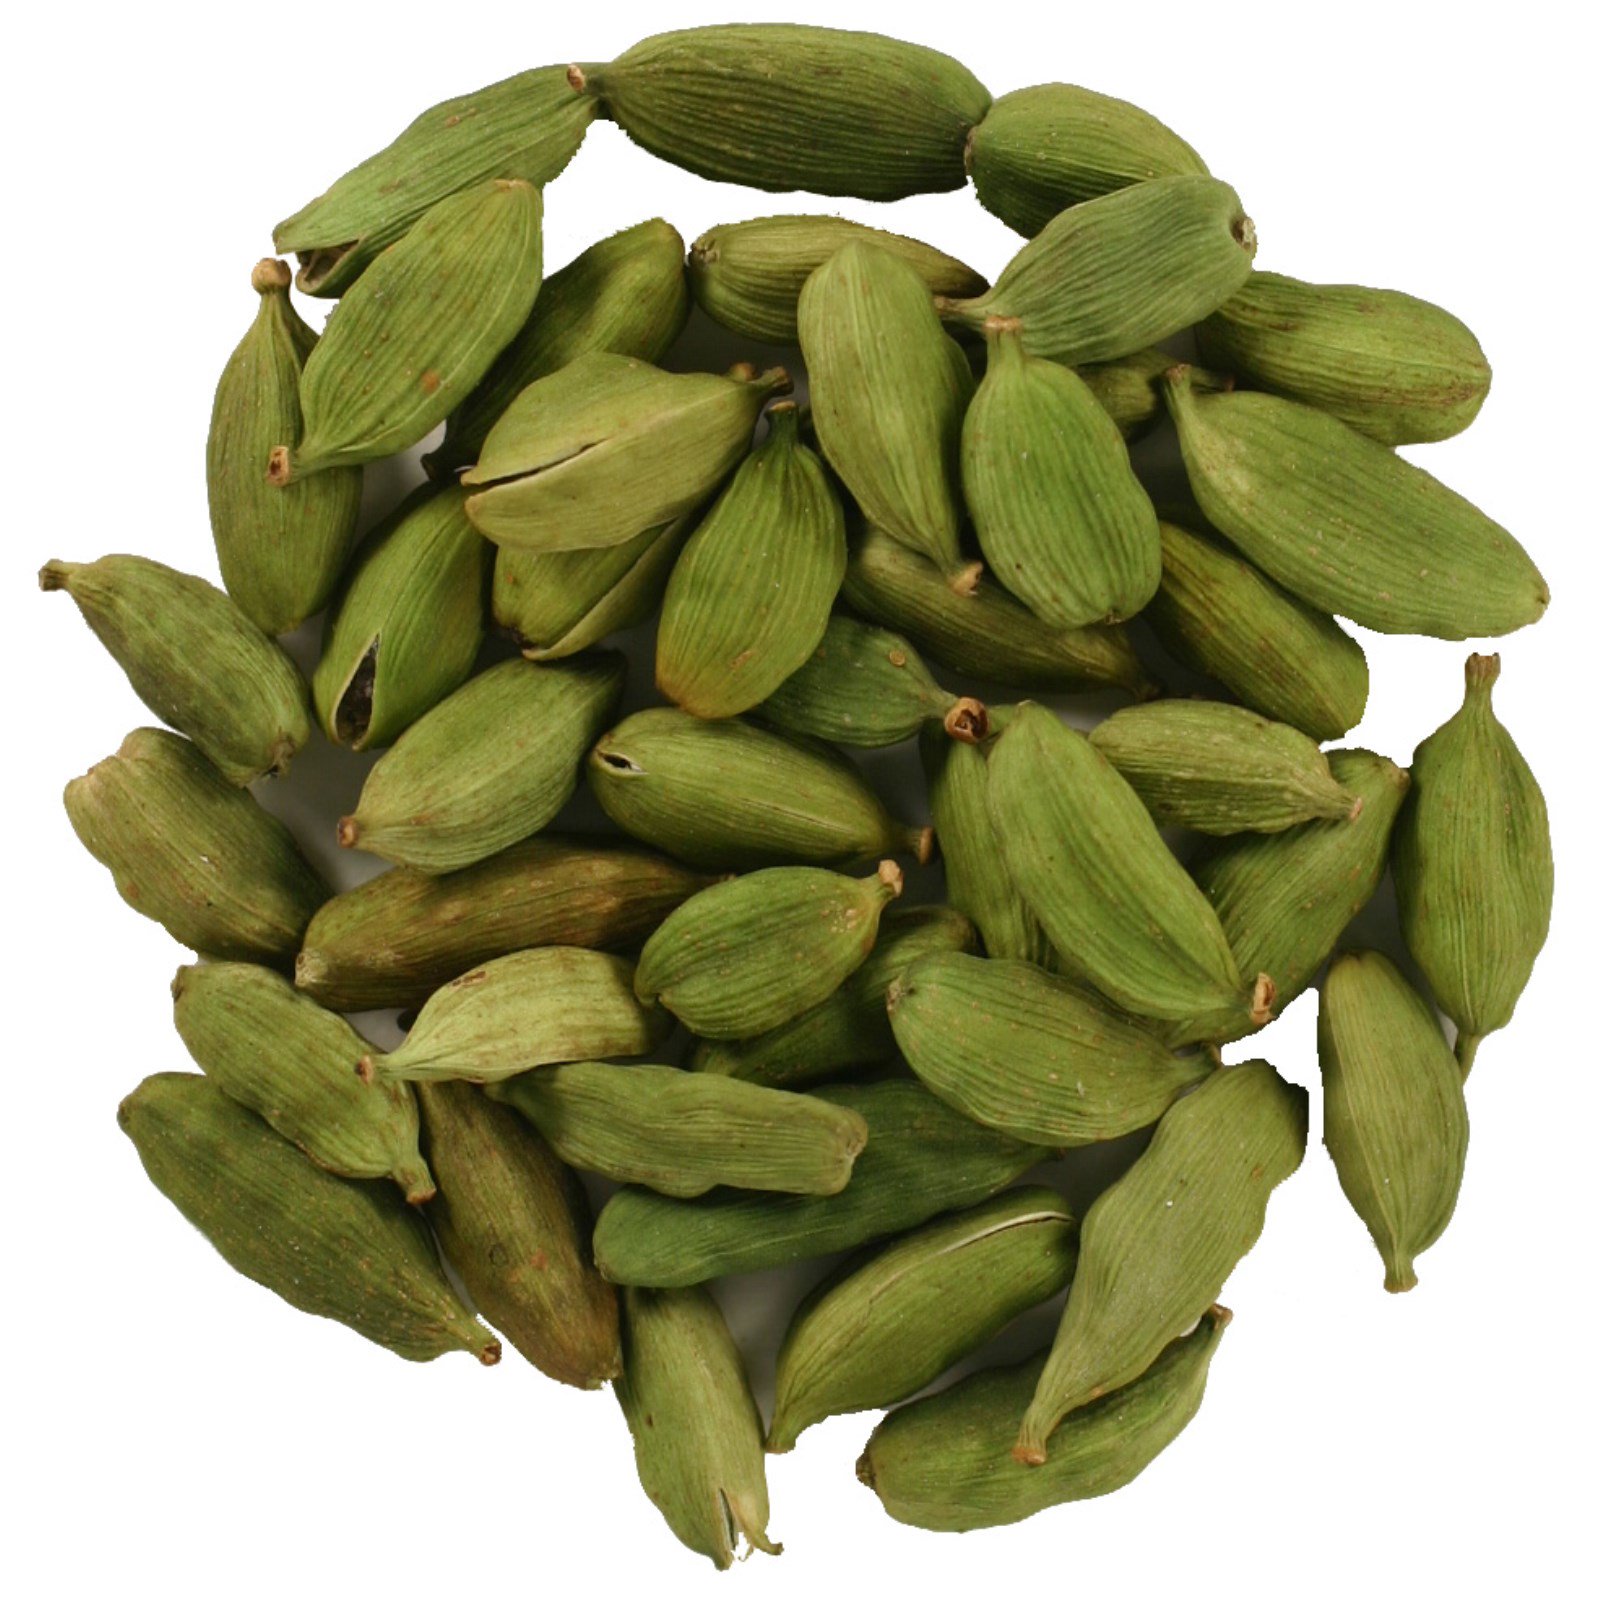 Frontier Natural Products, Whole Green Cardamom Pods, 16 oz (453 g ...